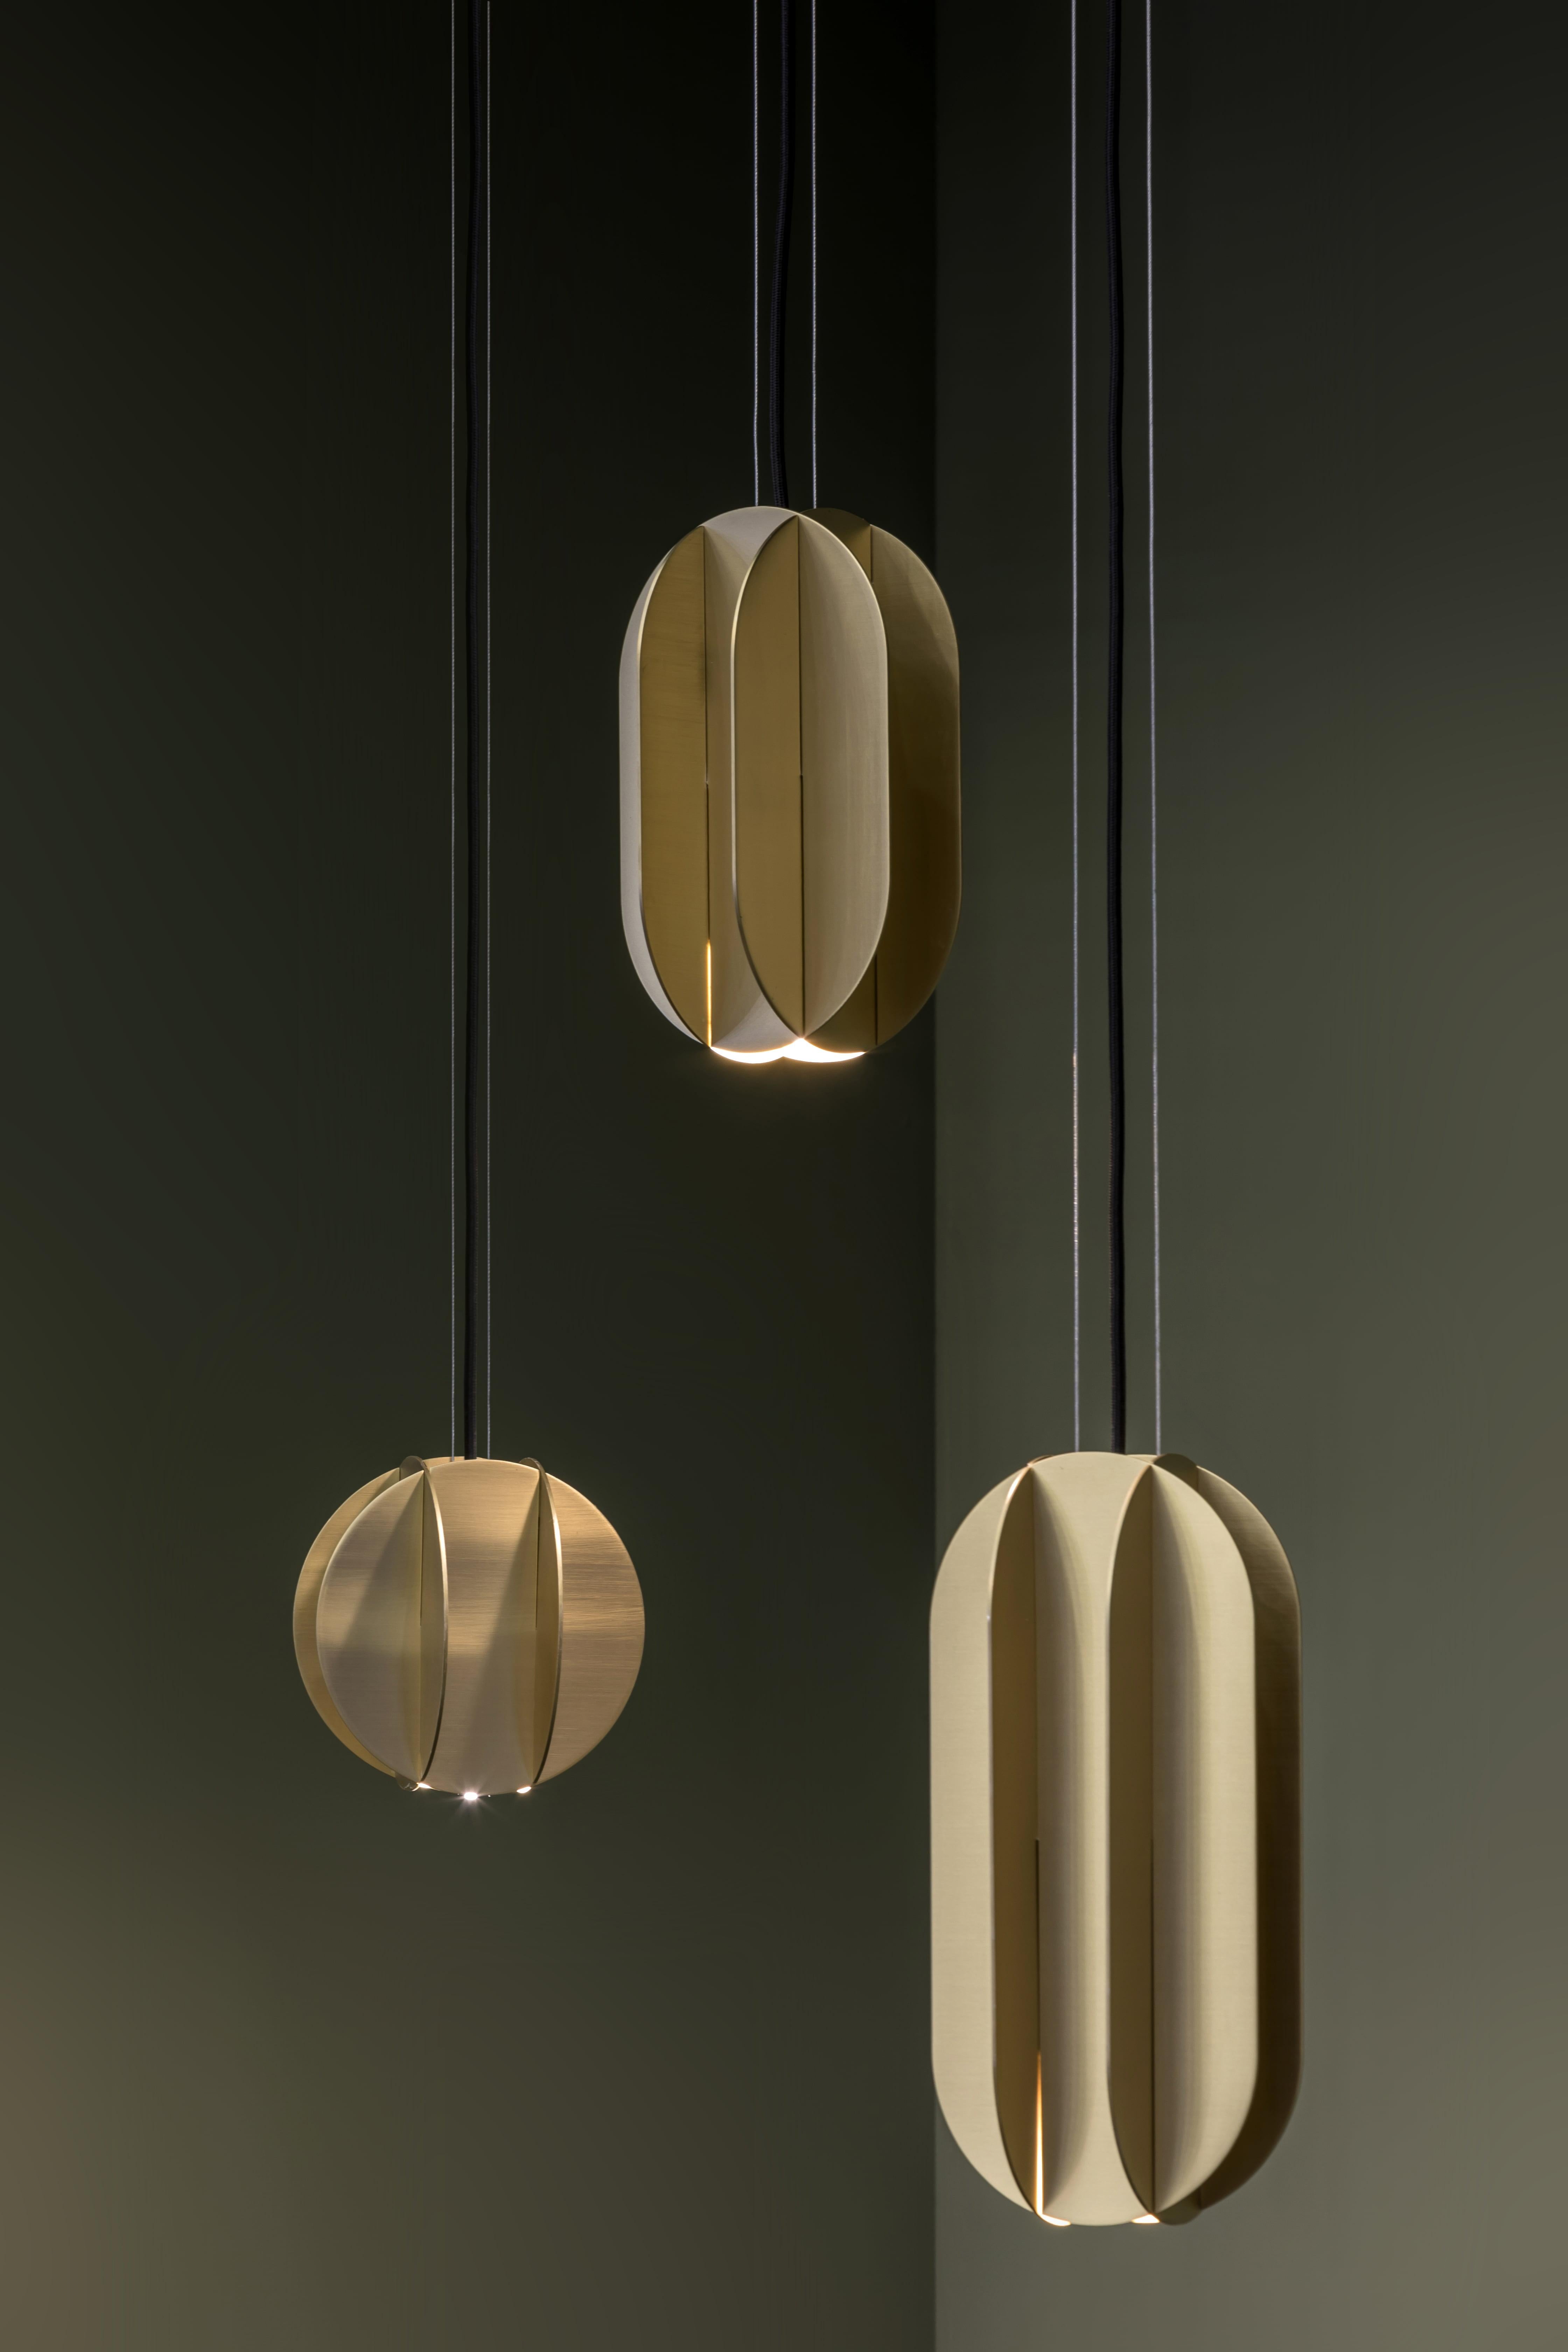 EL collection of lighting is inspired by the geometric works of the great Suprematist artists El Lissitzky and Kazimir Malevich. Suprematism is a modernist movement in the art of the early twentieth century, focused on the basic geometric forms,